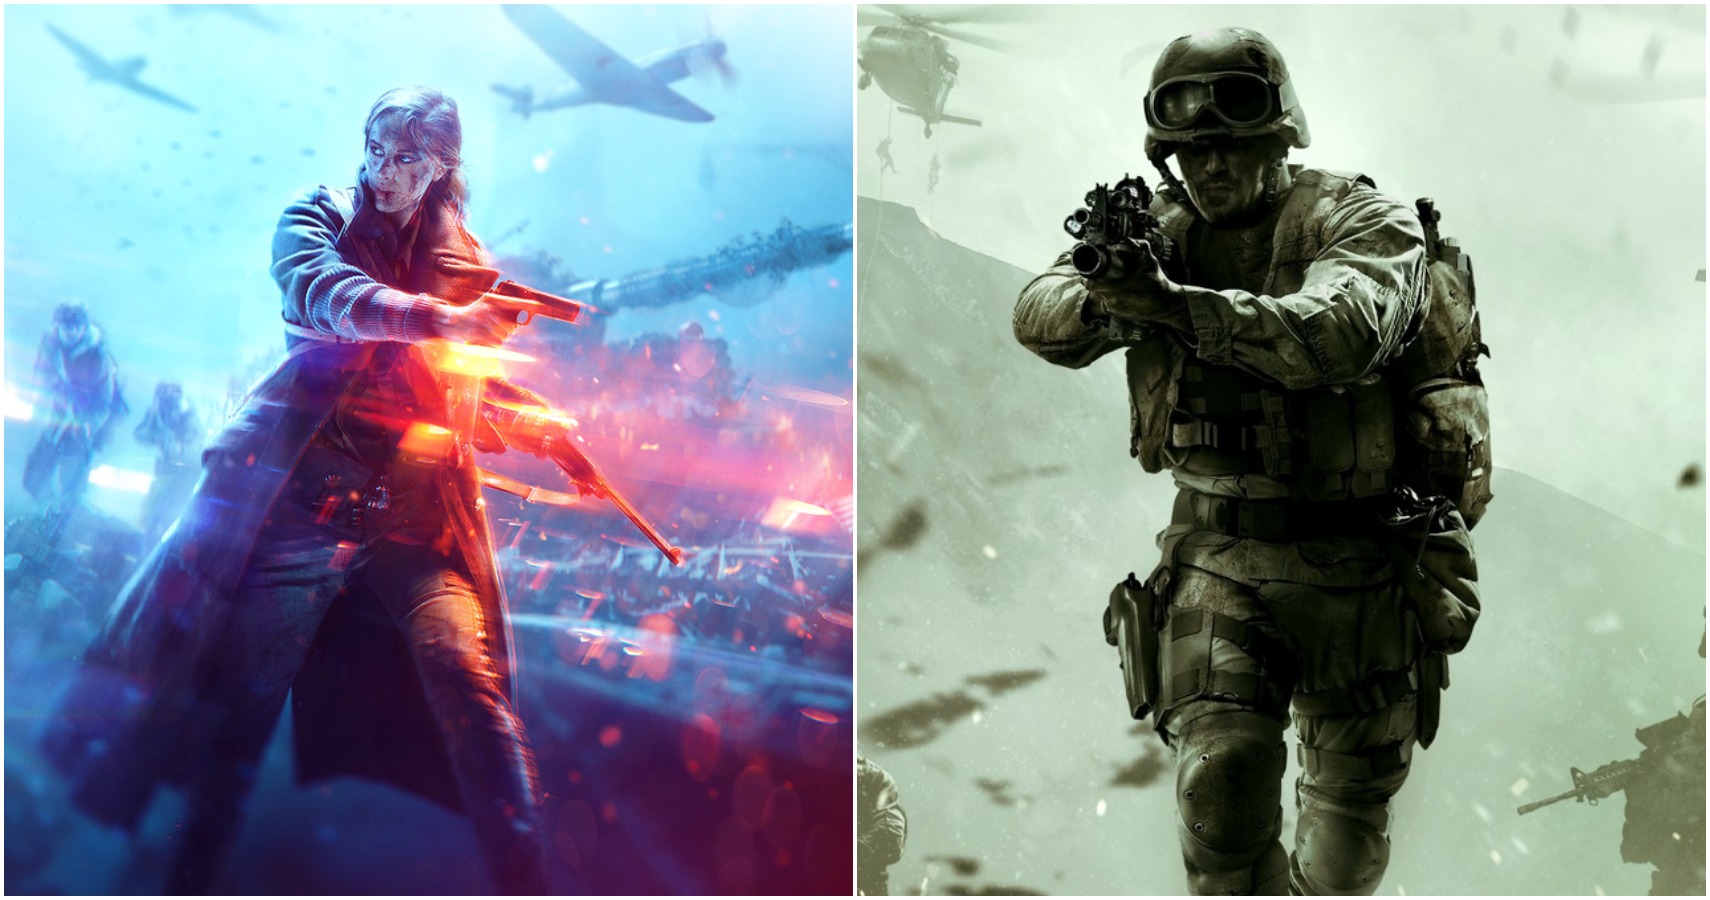 If The Rumors About Call Of Duty’s 2021 Lack Of Multiplayer Are True, It’s Great News For Battlefield 6